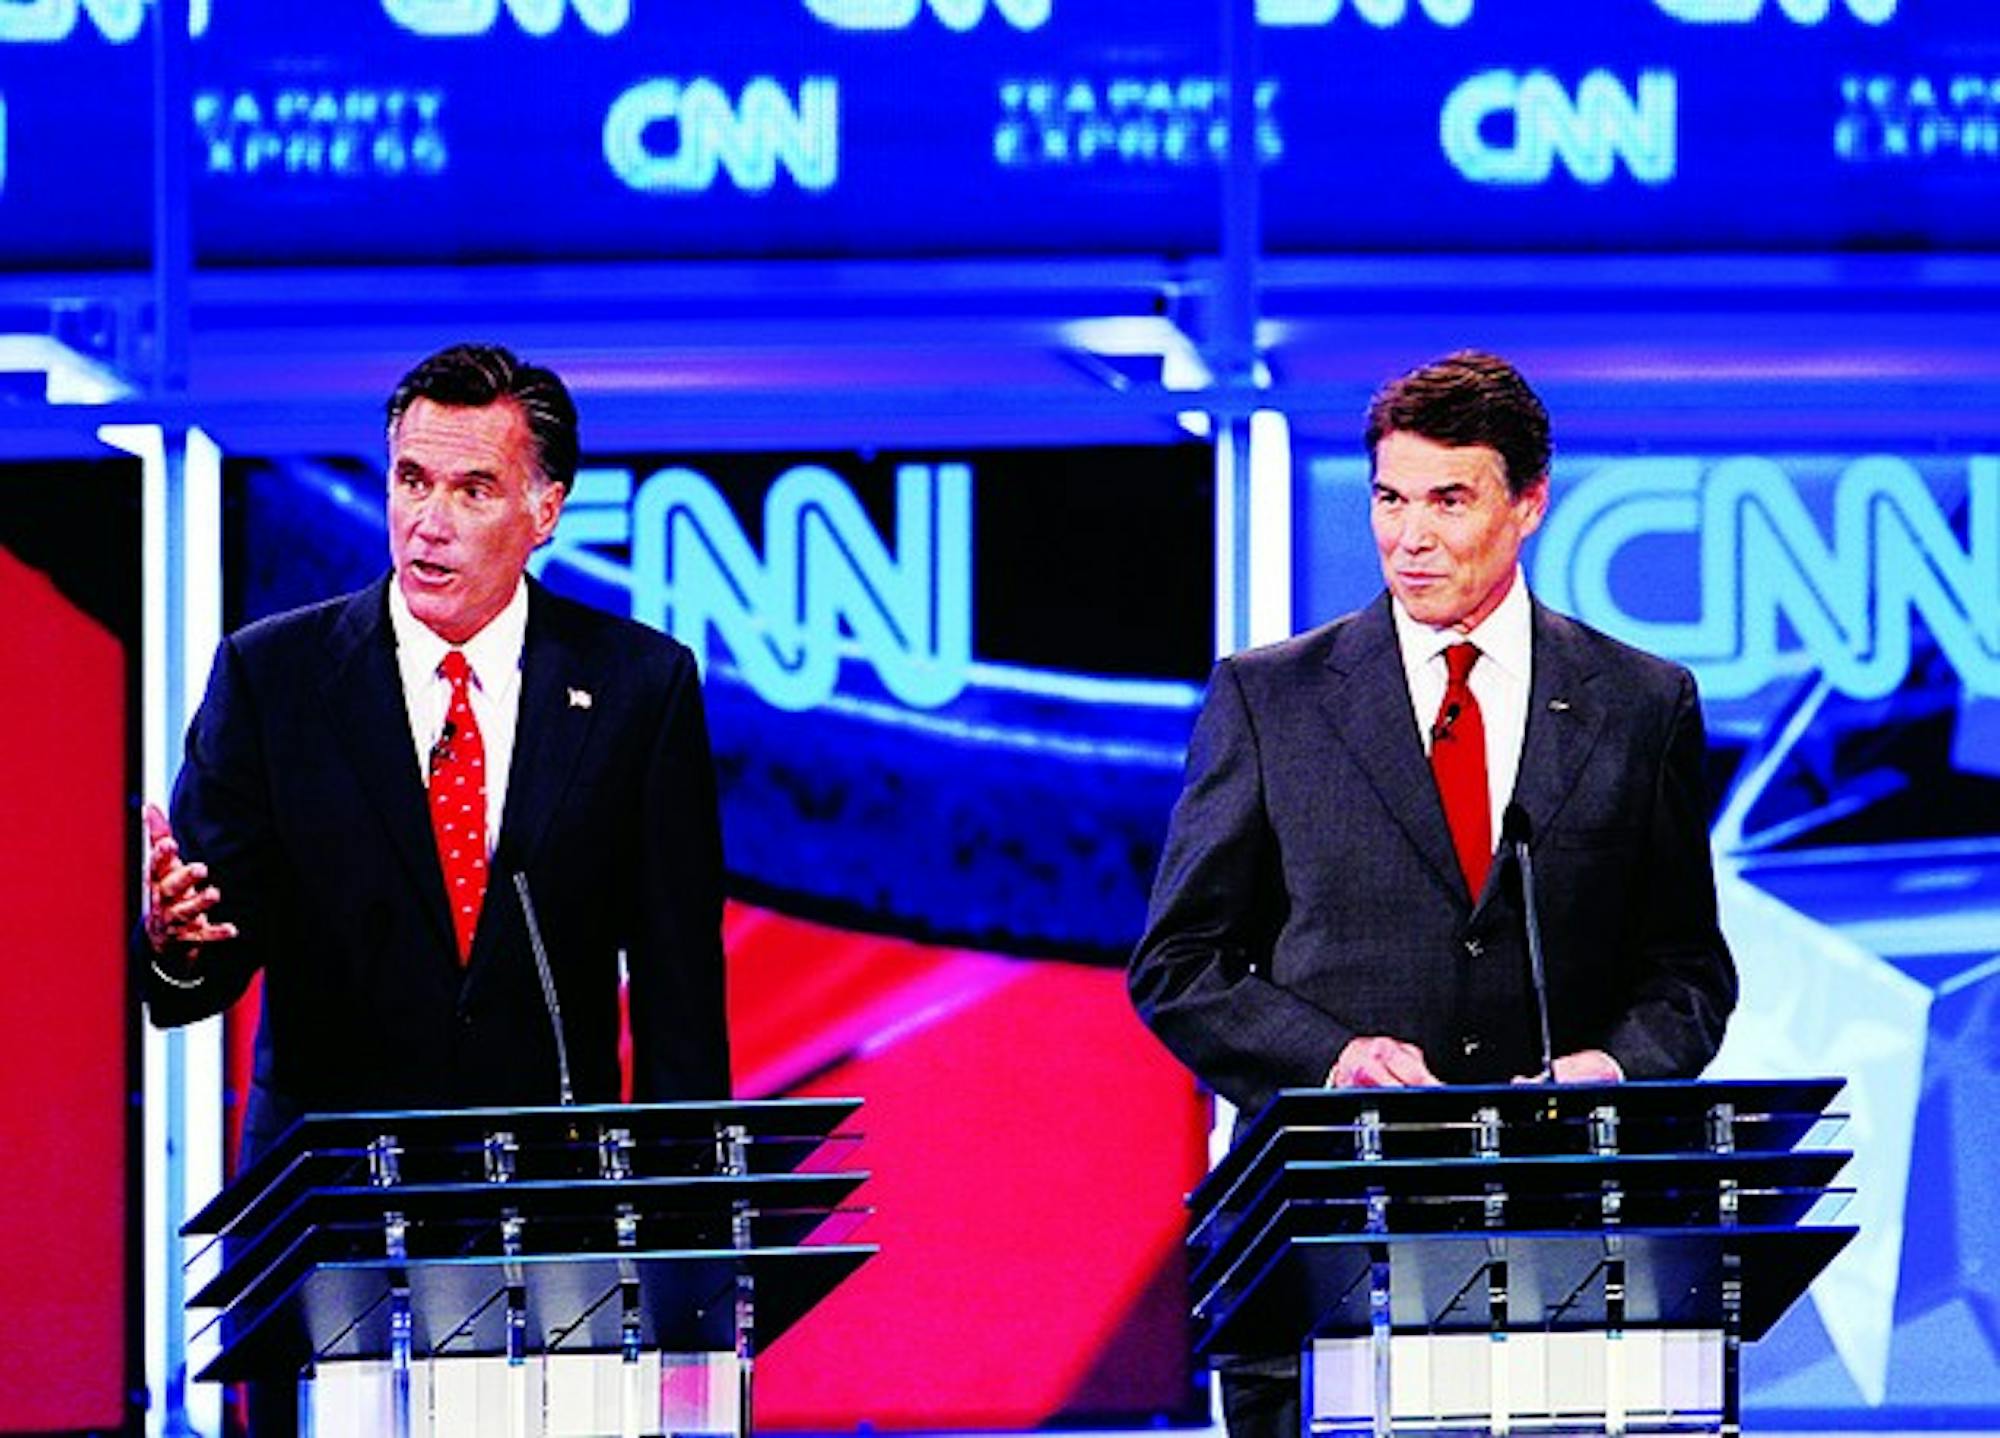 Pundits and professors alike expect former Gov. Mitt Romney, R-Mass., and Gov. Rick Perry, R-Texas, to attack each other on the issues in Tuesday's debate.